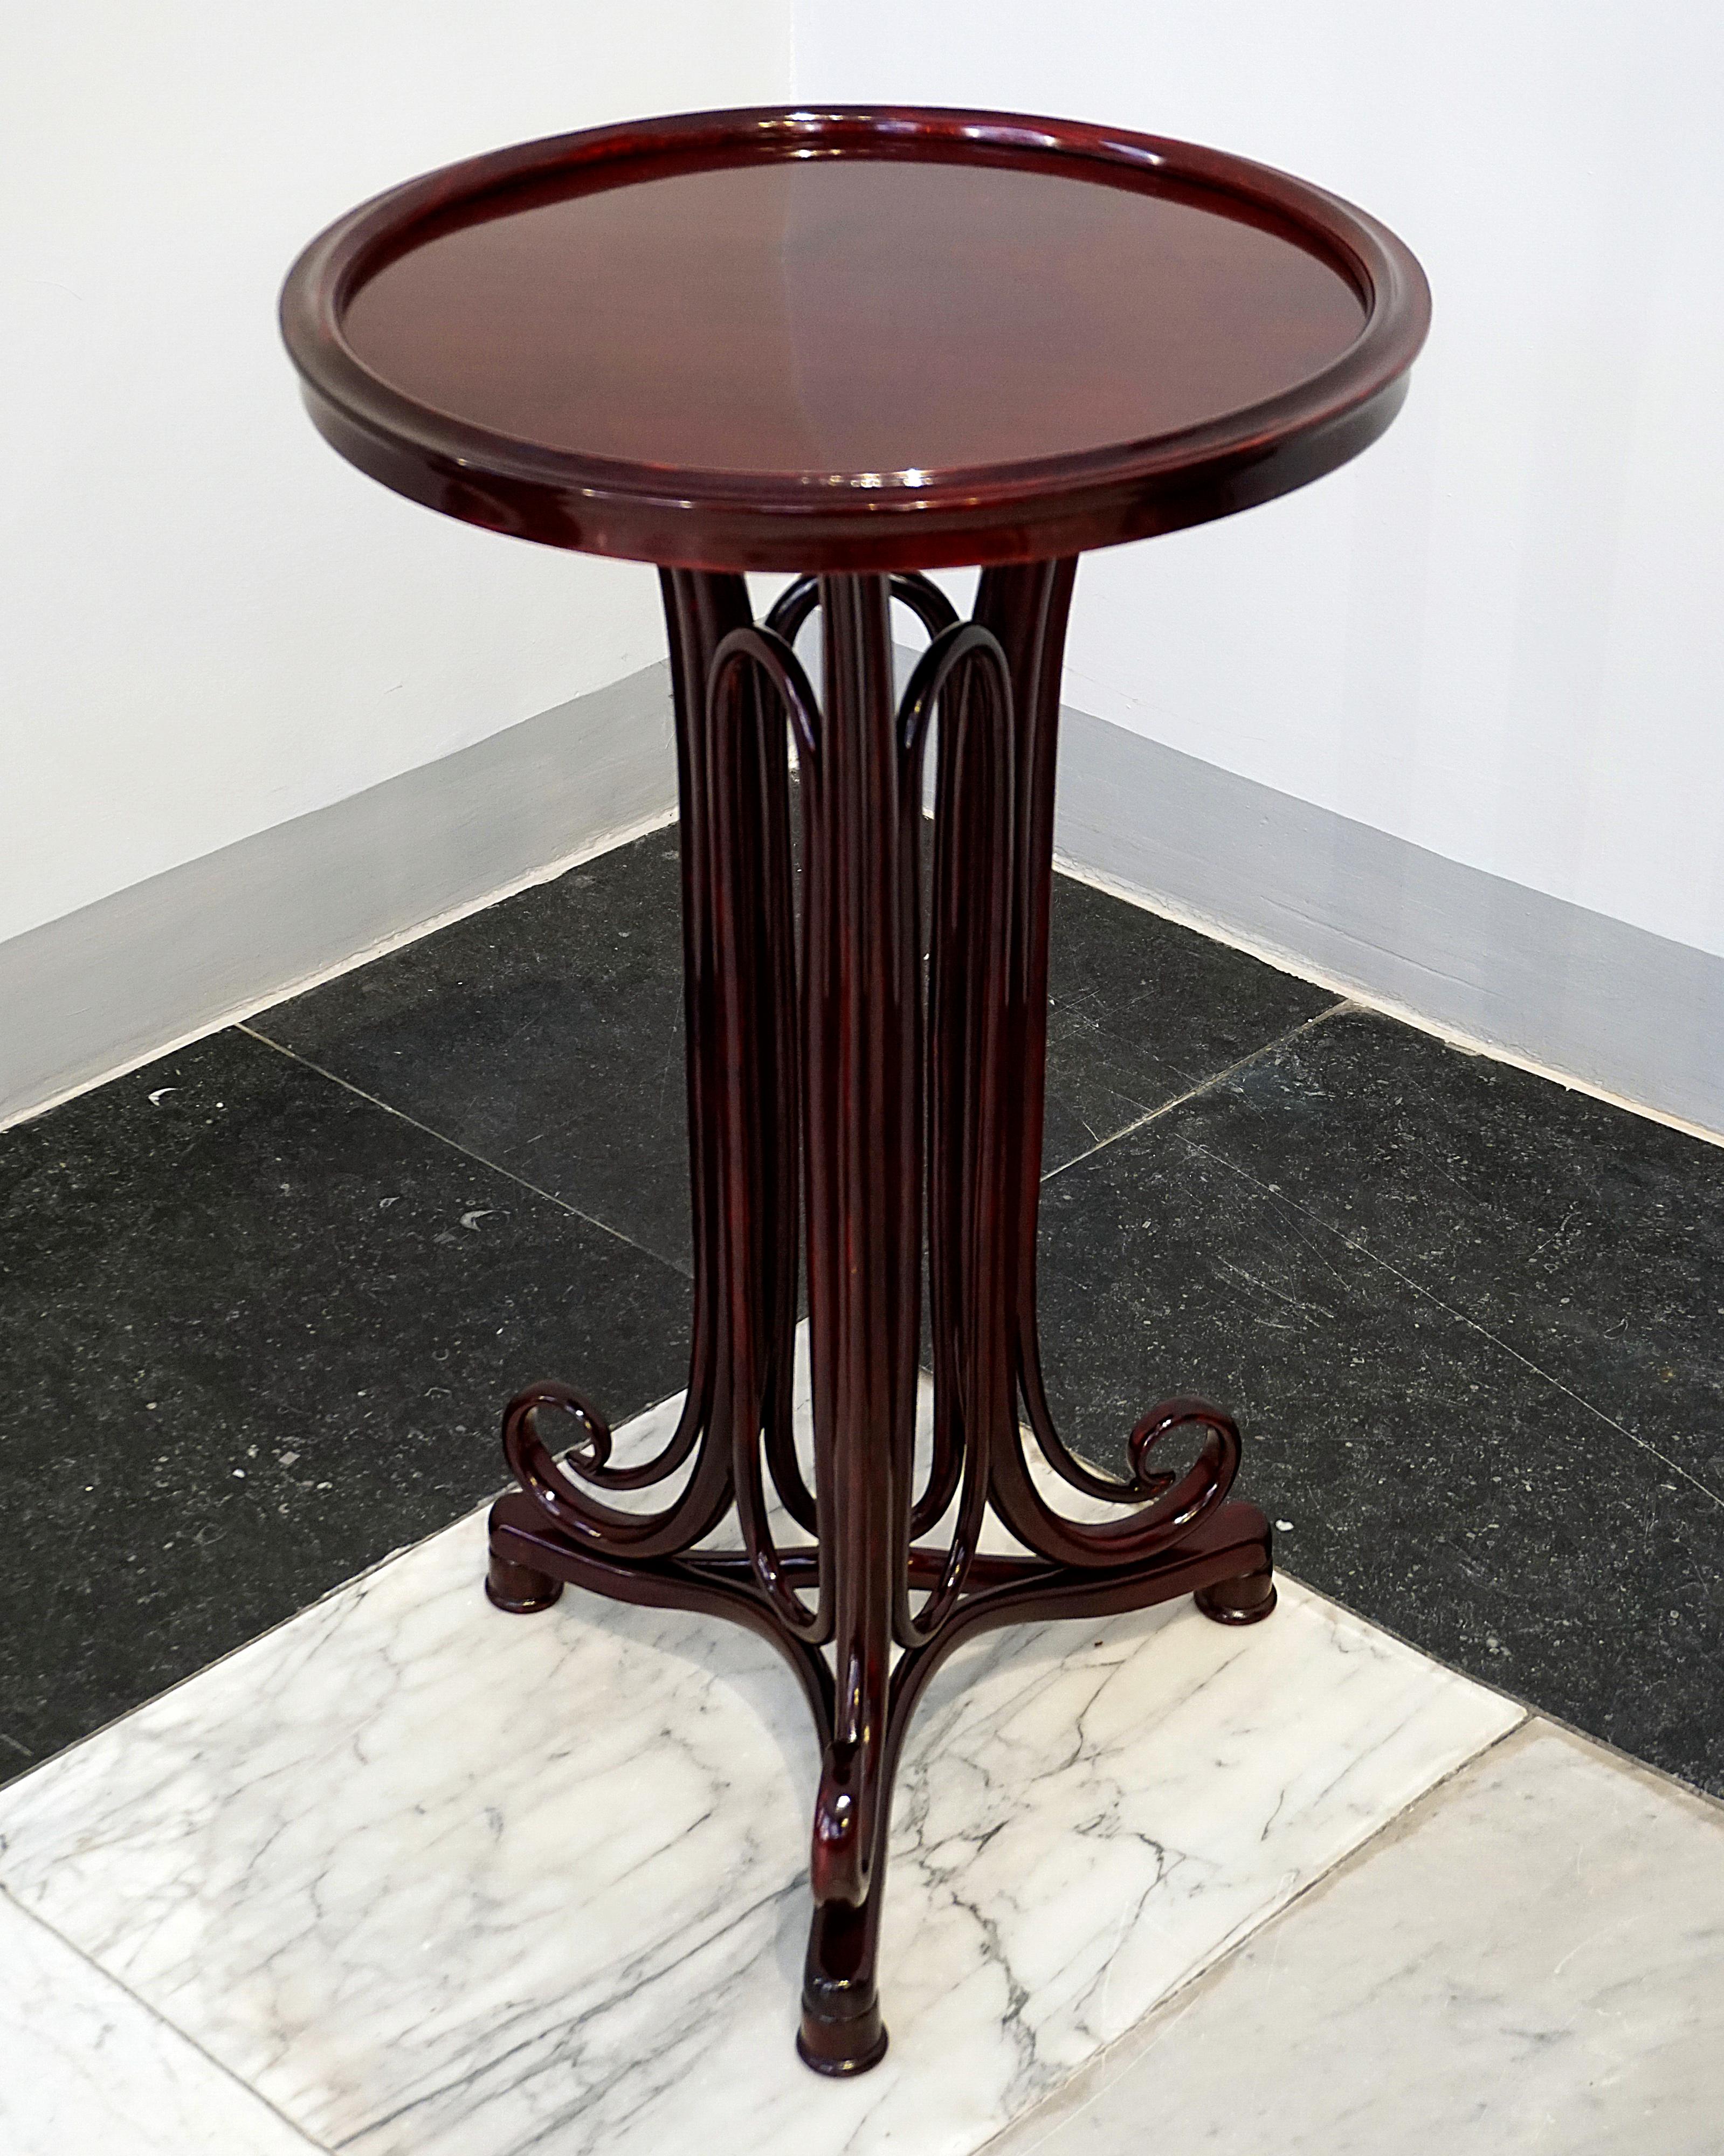 Early 20th Century Thonet Vienna Art Nouveau Saloon Reading Table No 1 Mahogany Stained circa 1900  For Sale